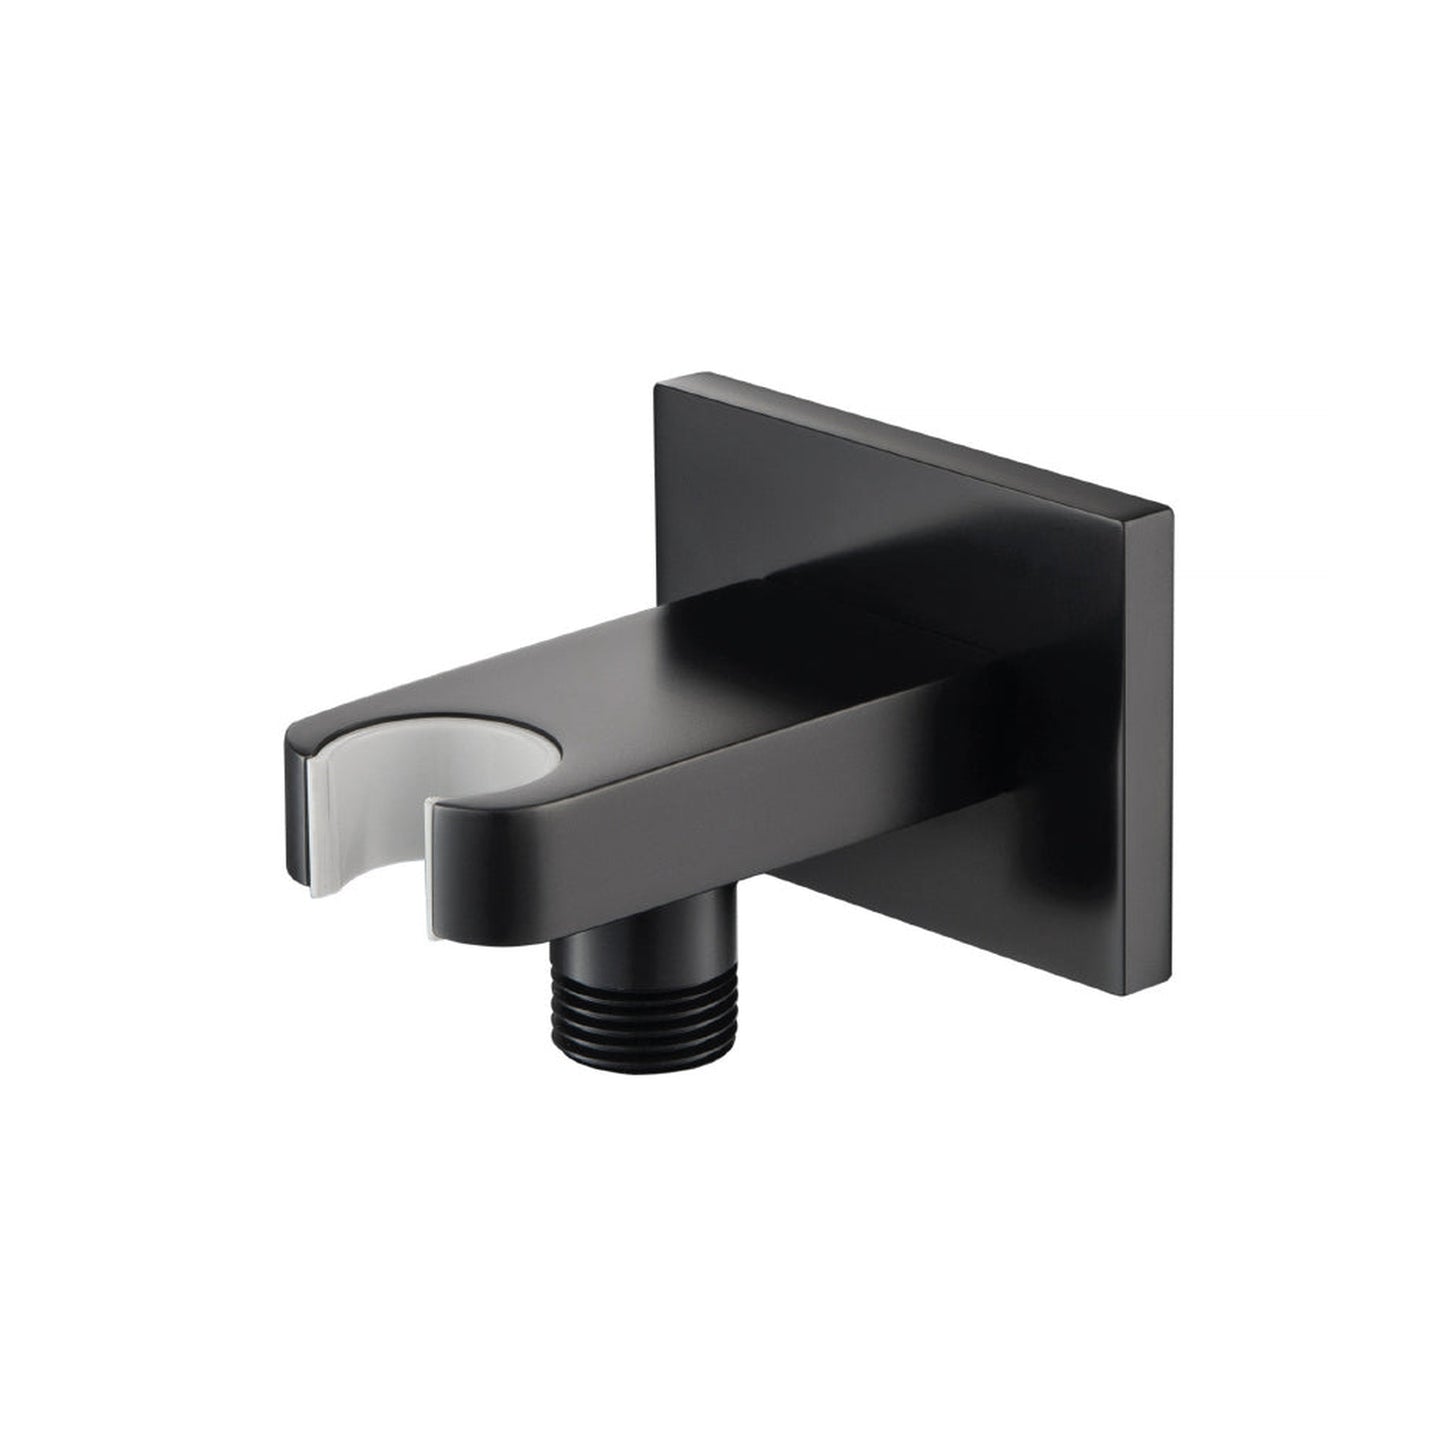 Isenberg Universal Fixtures Wall Elbow With Combo Holder in Matte Black (HS8007MB)